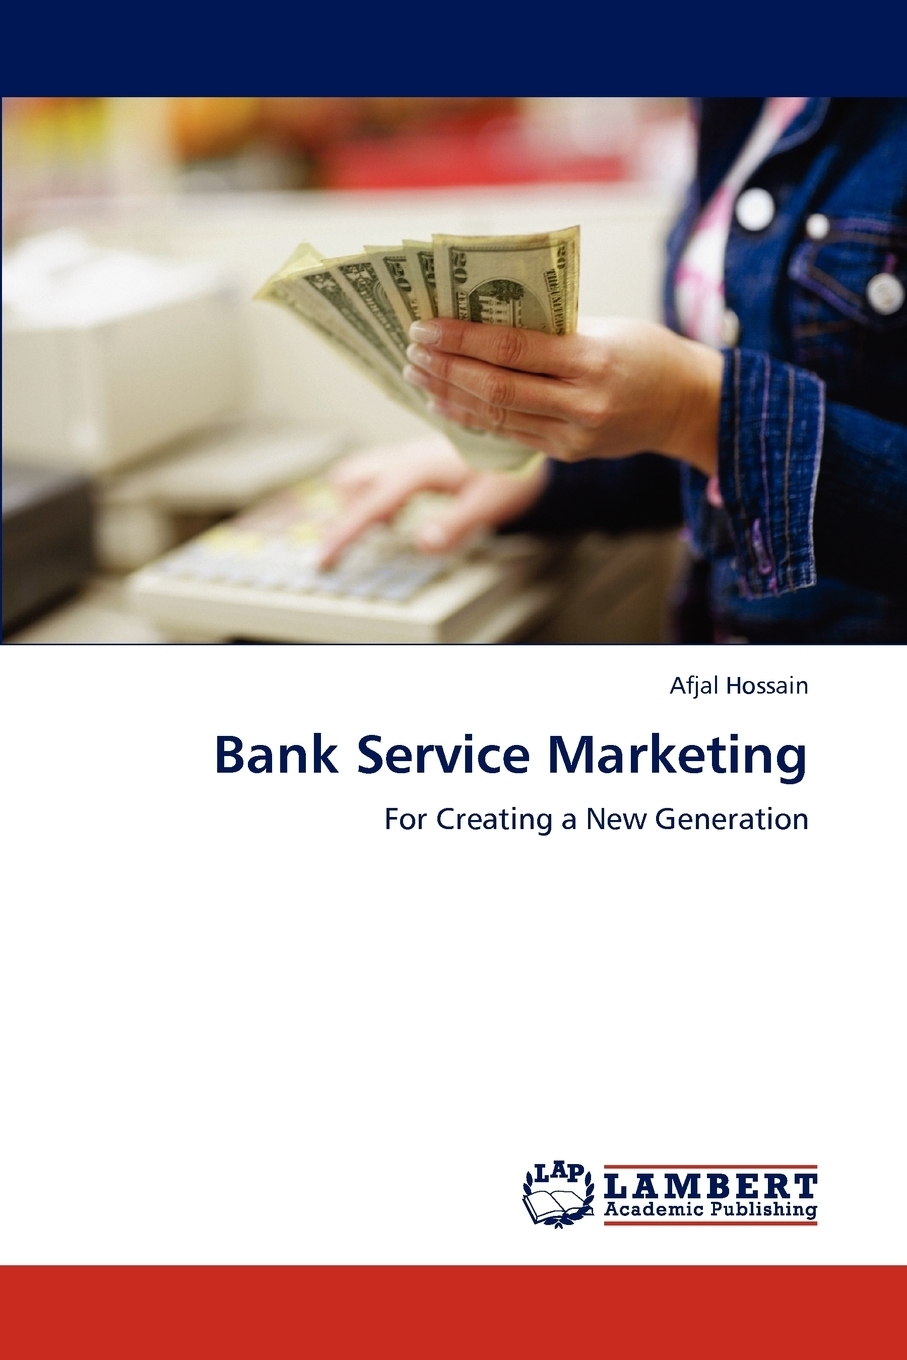 Banking book is. Bank service. Marketing books.